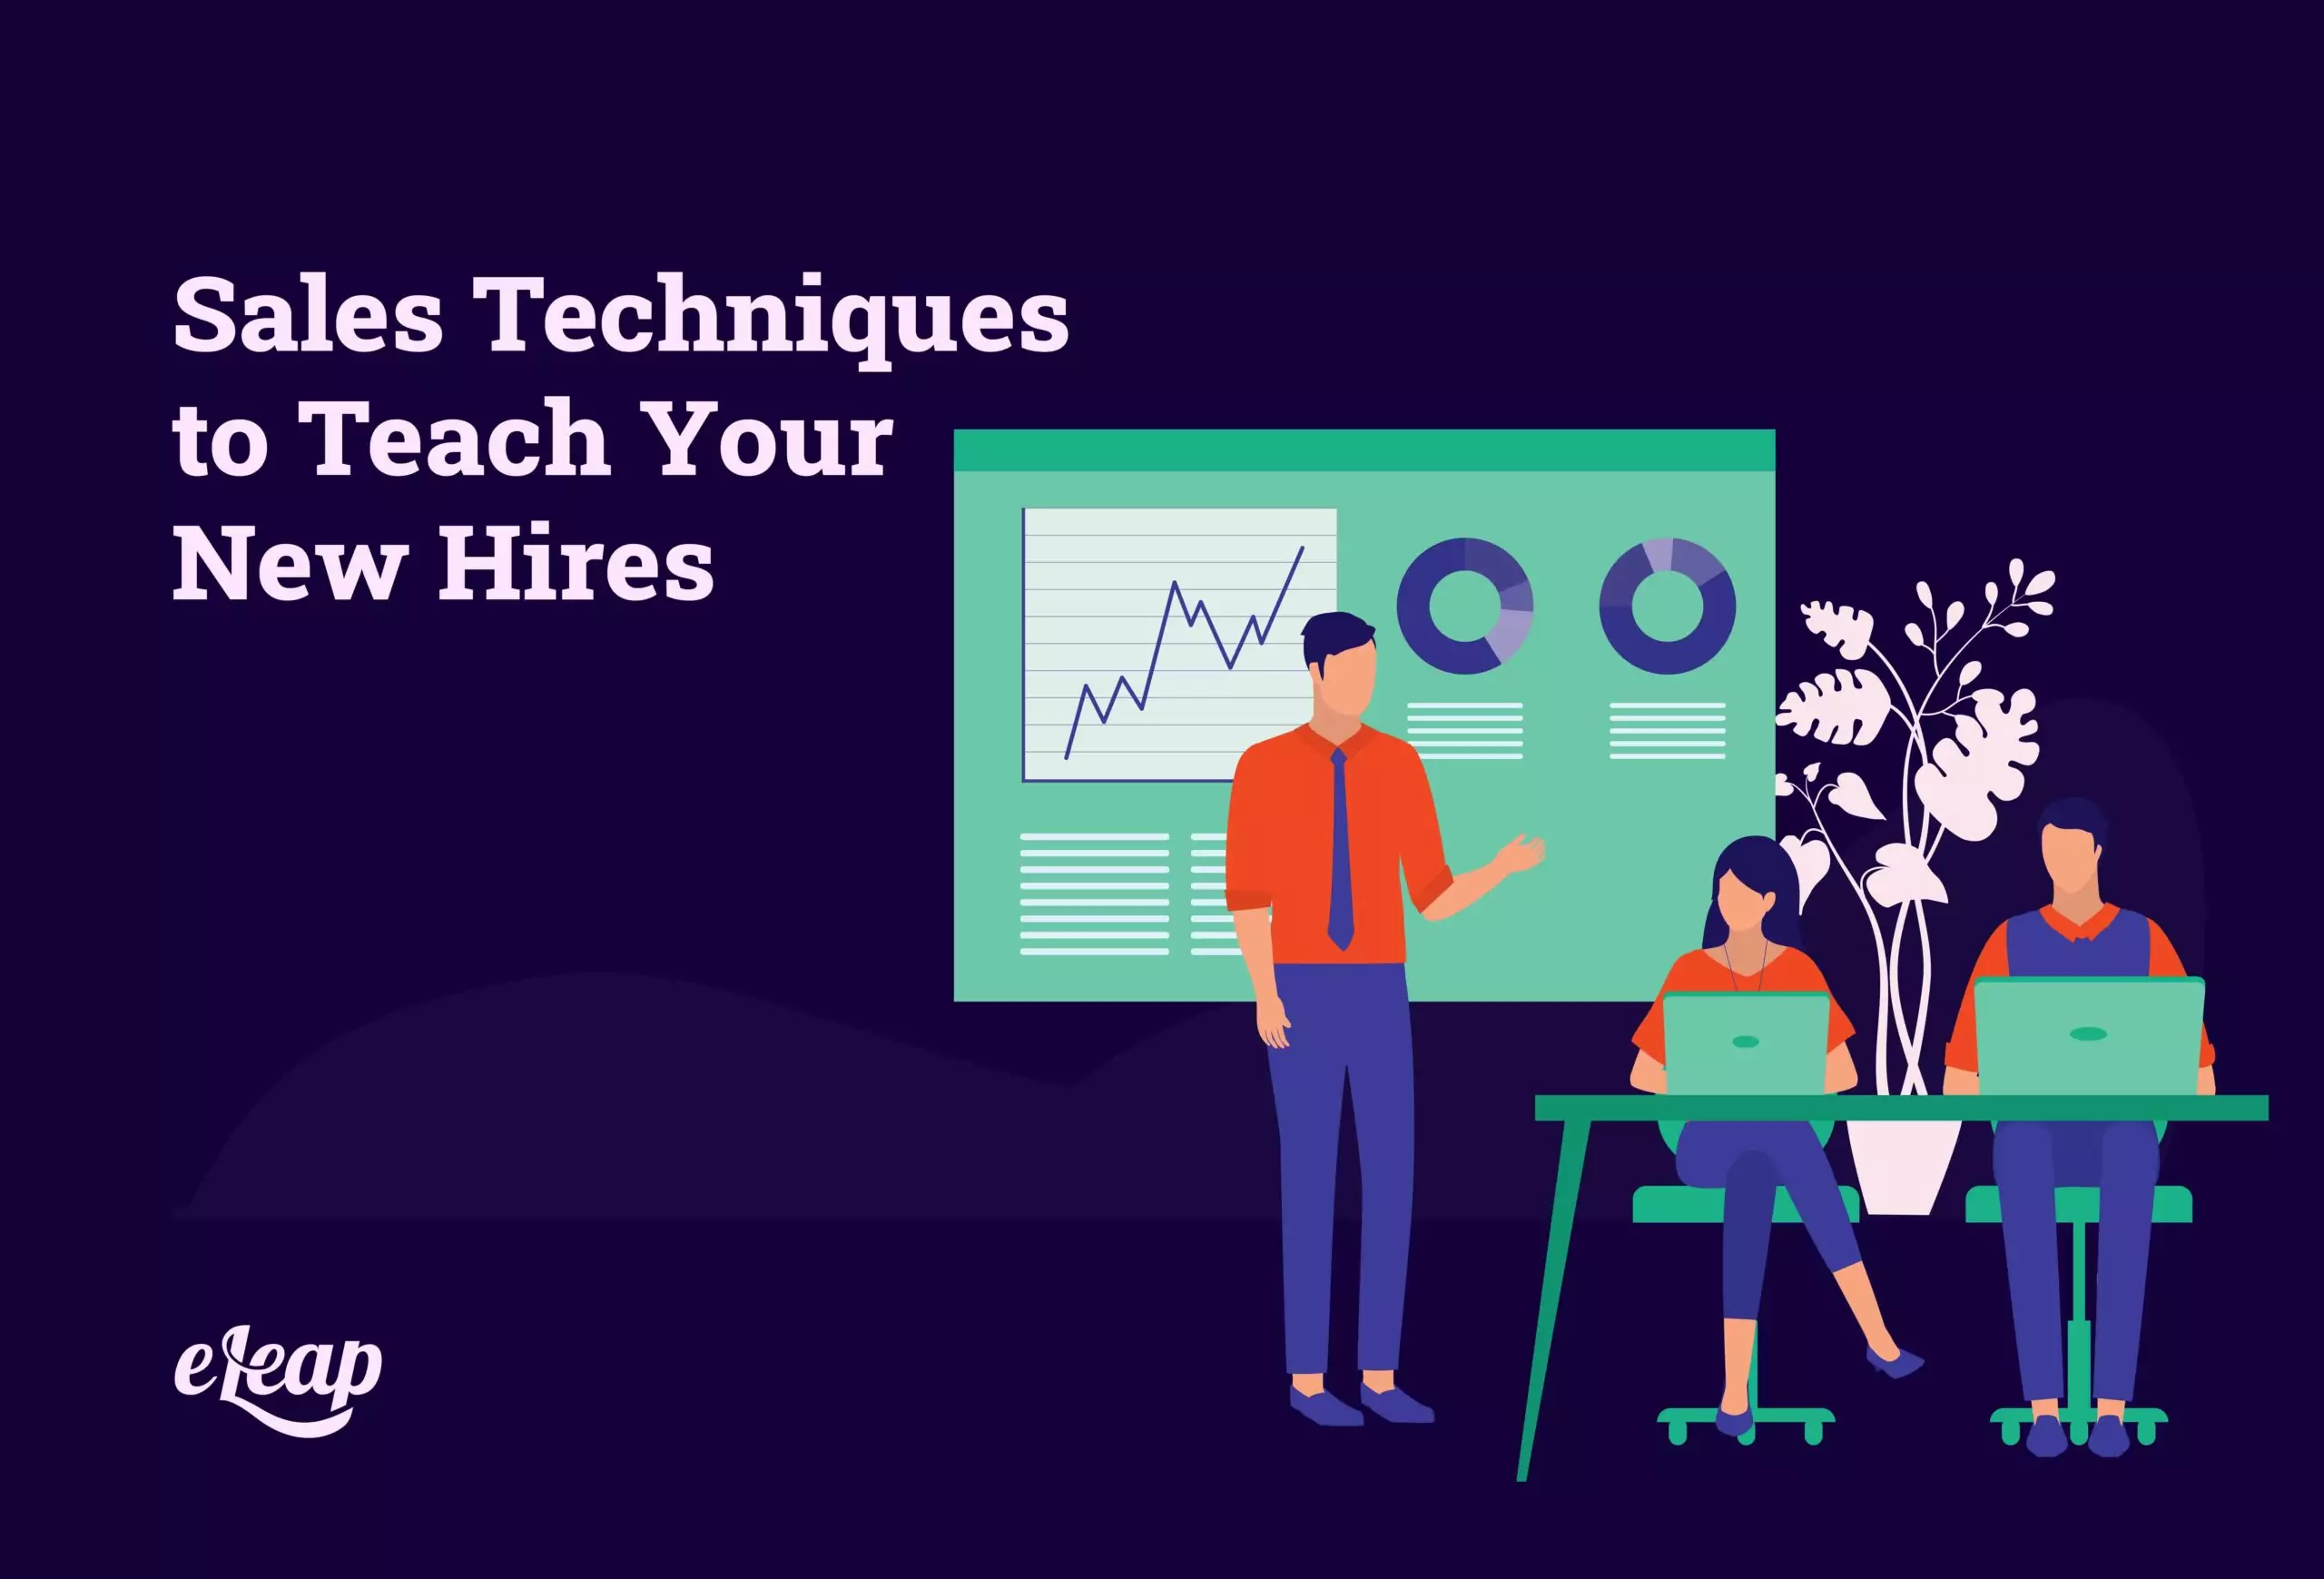 Sales Techniques to Teach Your New Hires